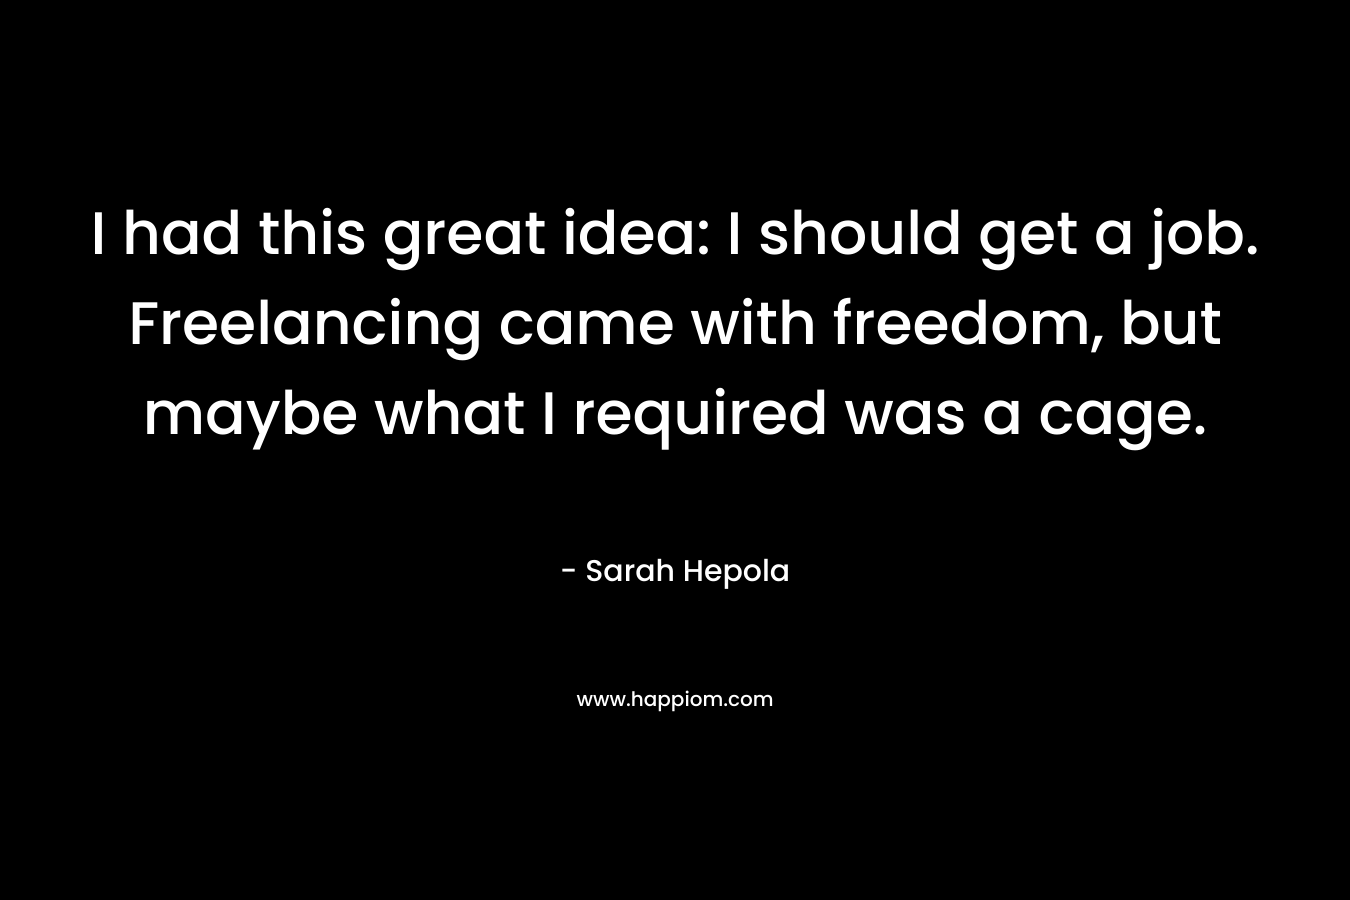 I had this great idea: I should get a job. Freelancing came with freedom, but maybe what I required was a cage. – Sarah Hepola